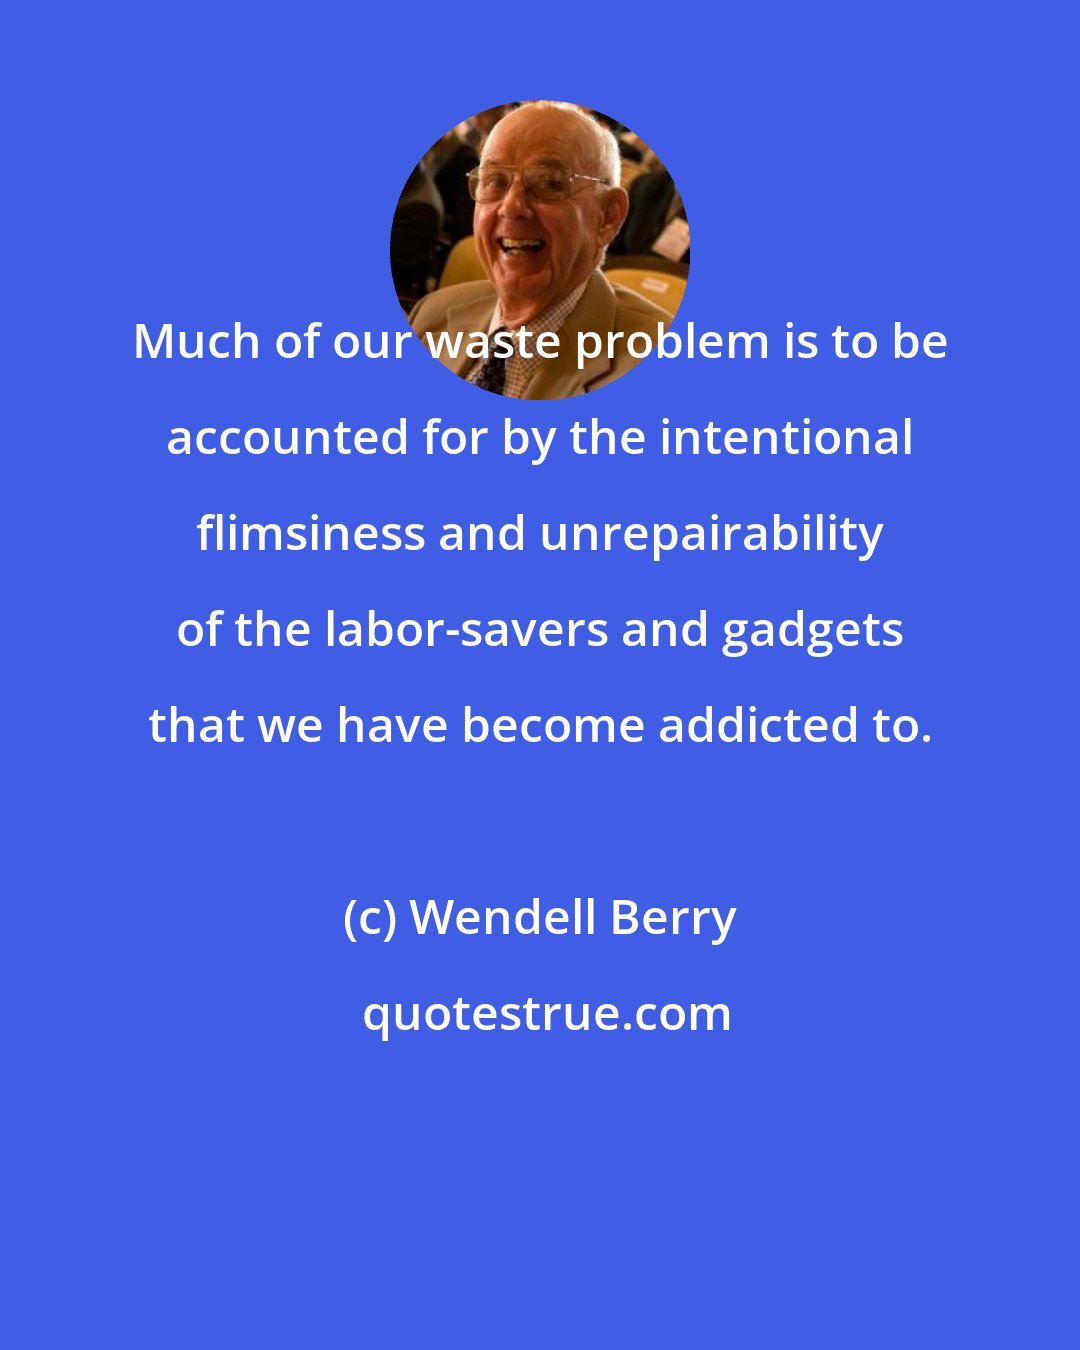 Wendell Berry: Much of our waste problem is to be accounted for by the intentional flimsiness and unrepairability of the labor-savers and gadgets that we have become addicted to.